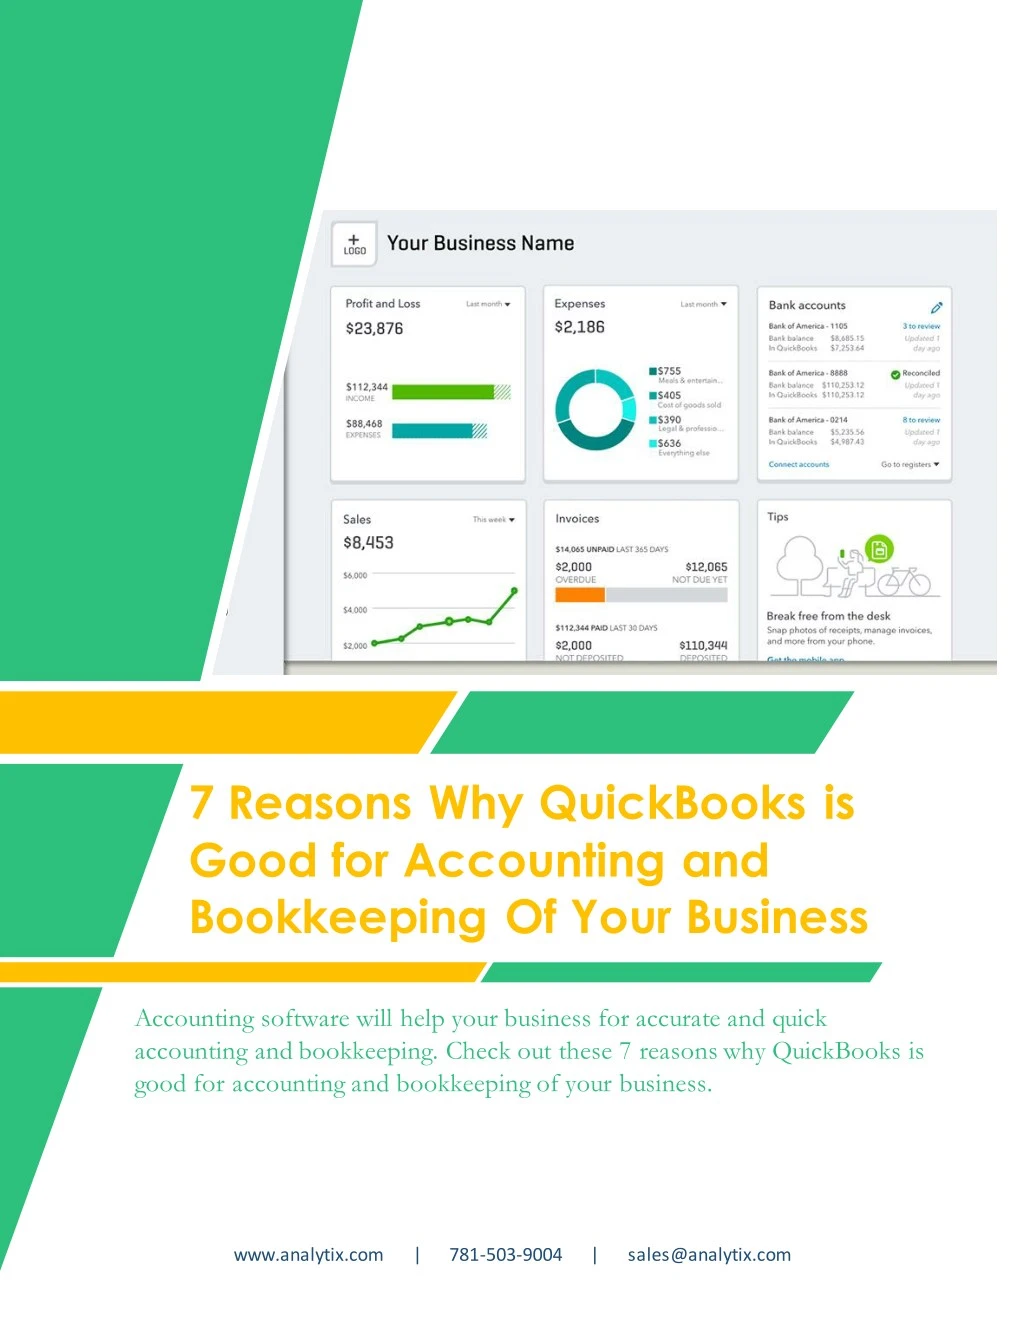 7 reasons why quickbooks is good for accounting